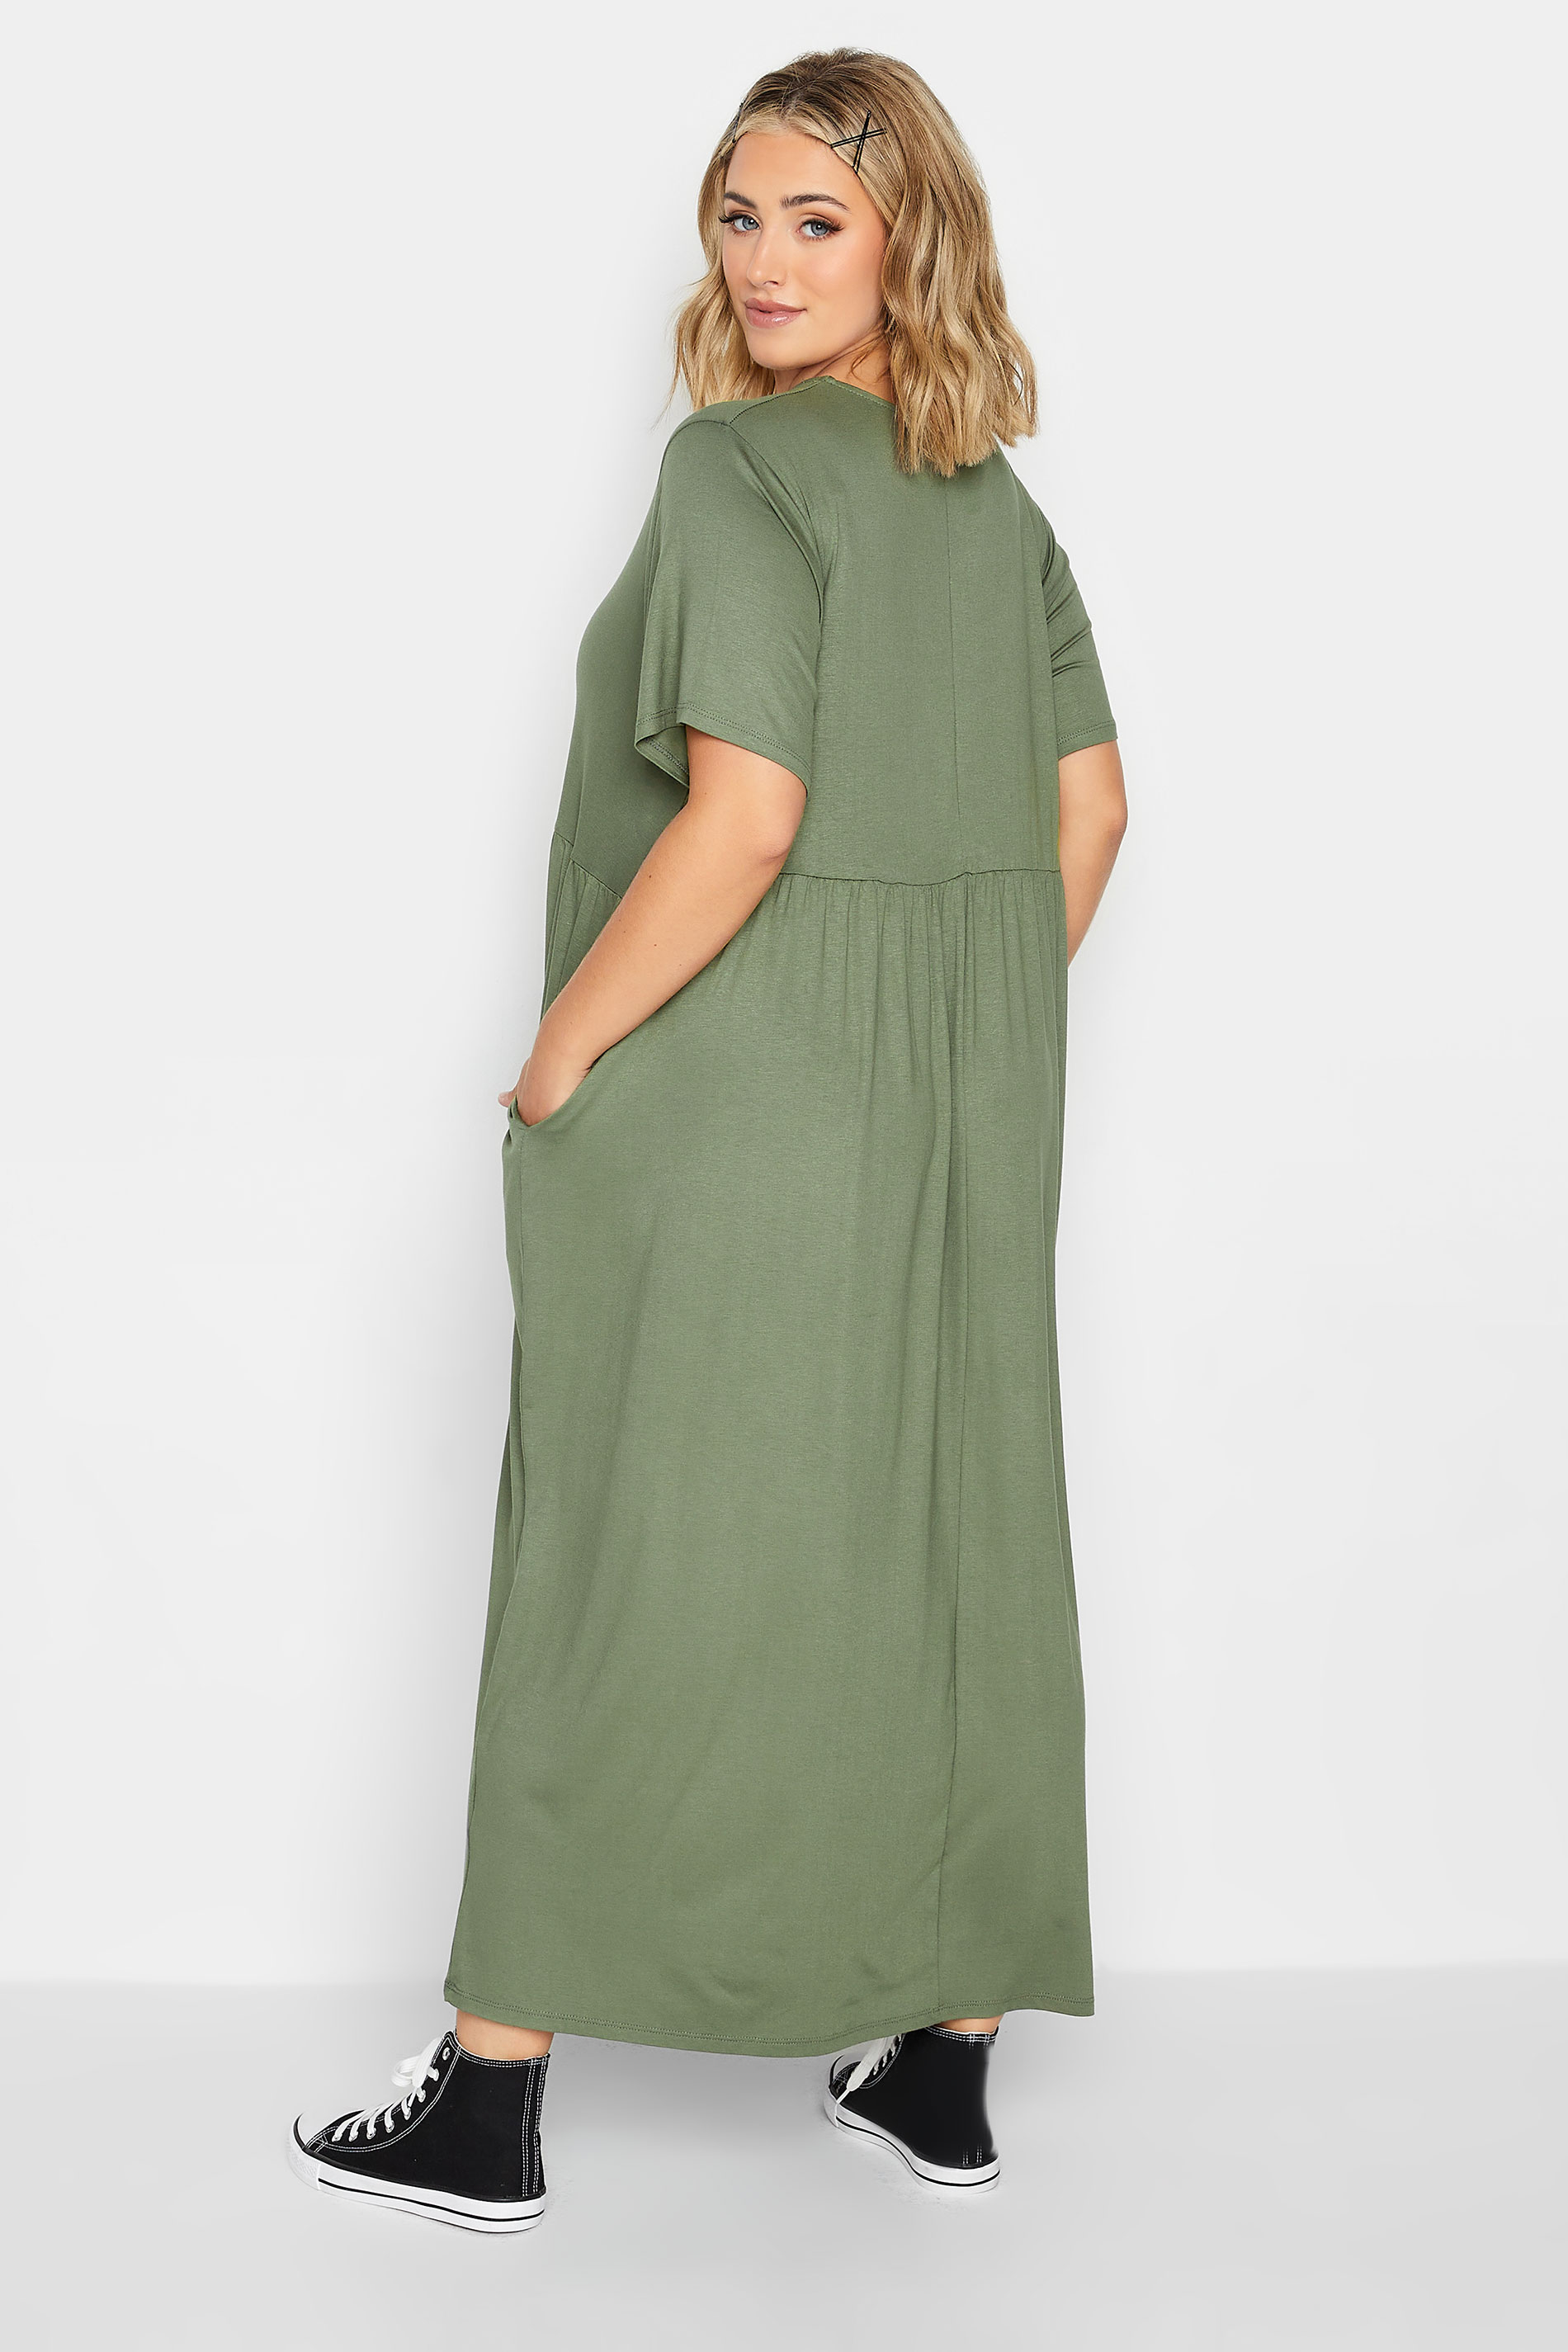 LIMITED COLLECTION Plus Size Khaki Green Pocket Maxi Dress | Yours Clothing 3